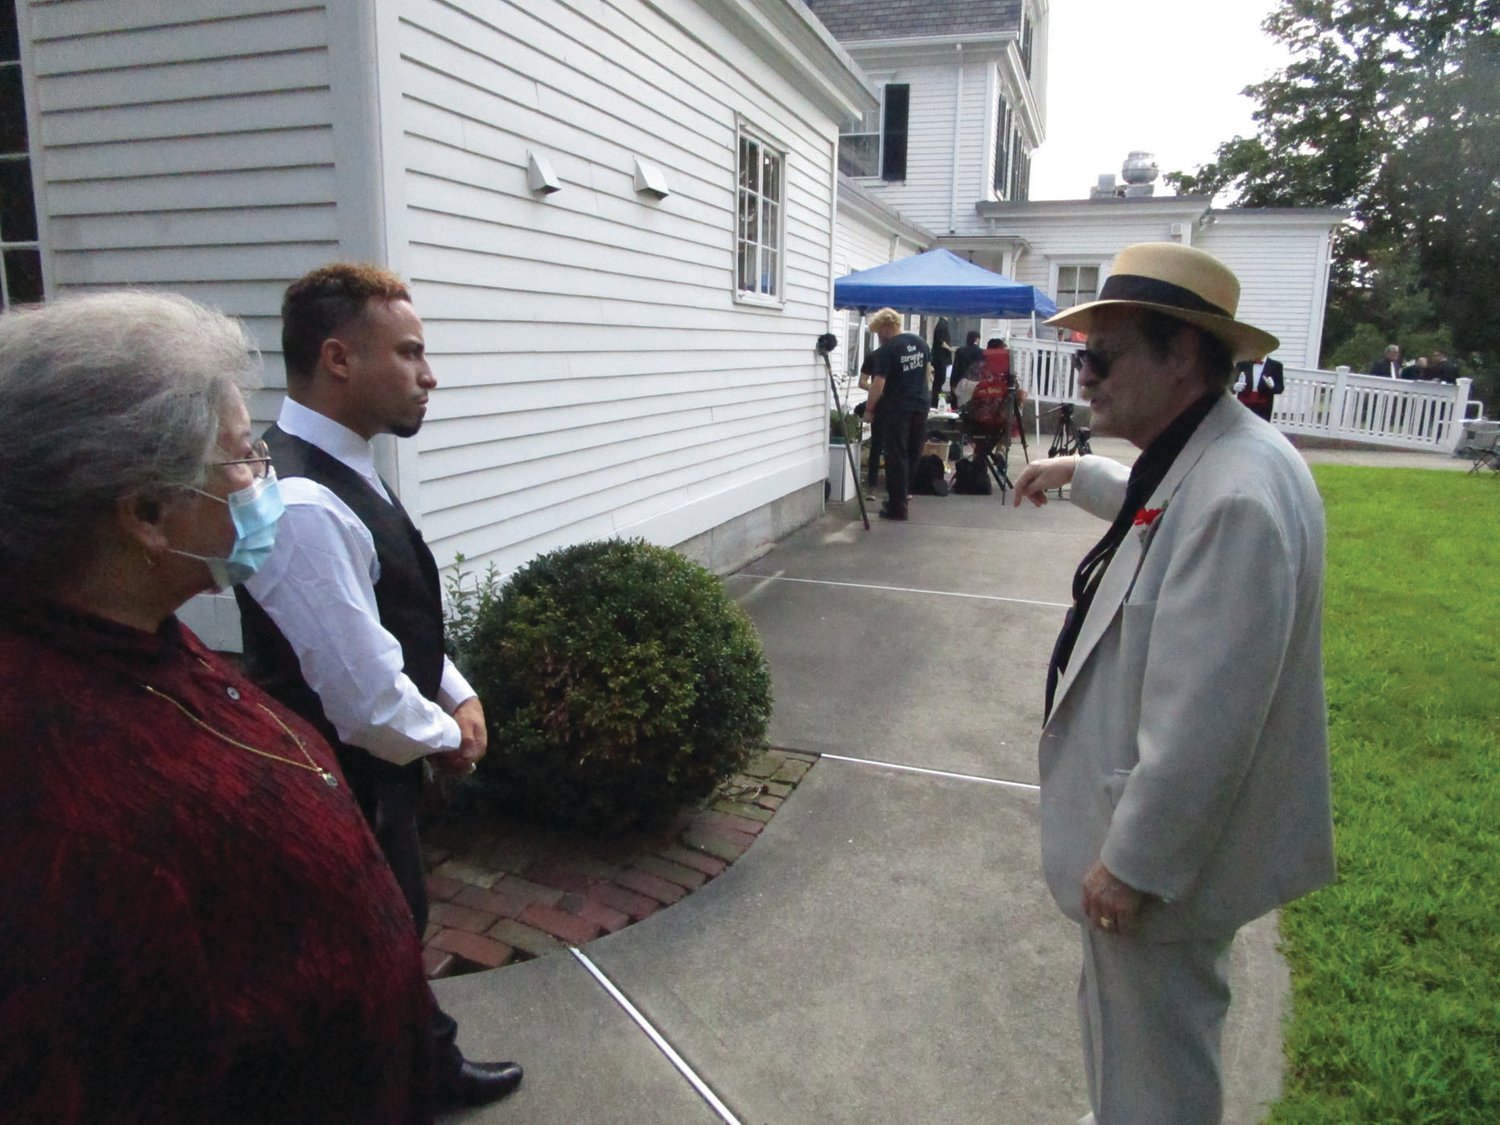 HOME TEAM: Gregg Mierka, right, and Mary Mierka, left, resident caretakers of Sprague Mansion, speak with cast member Jesse Vega ahead of Saturday’s shoot for “Poor Paul.” Gregg, who has appeared in several films and shows over the years, played a small role in the production.